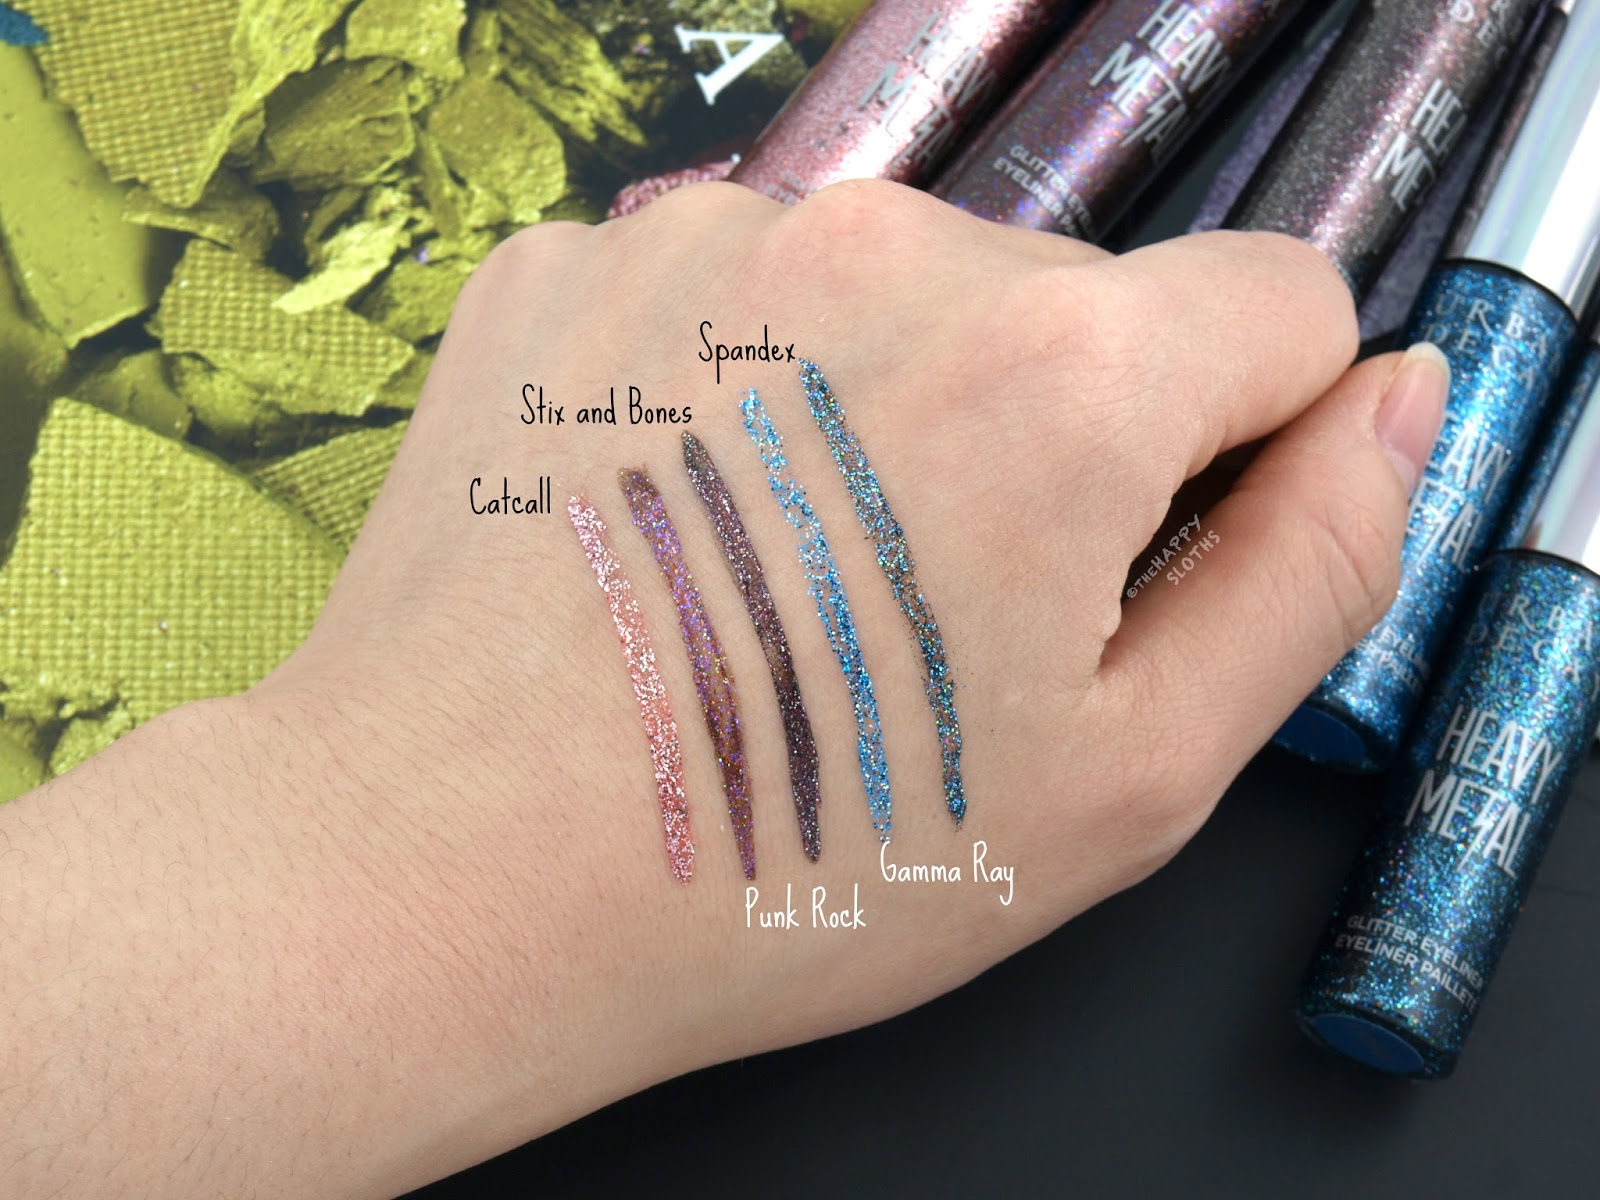 Urban Decay Heavy Metal Glitter Eyeliner: Review and Swatches